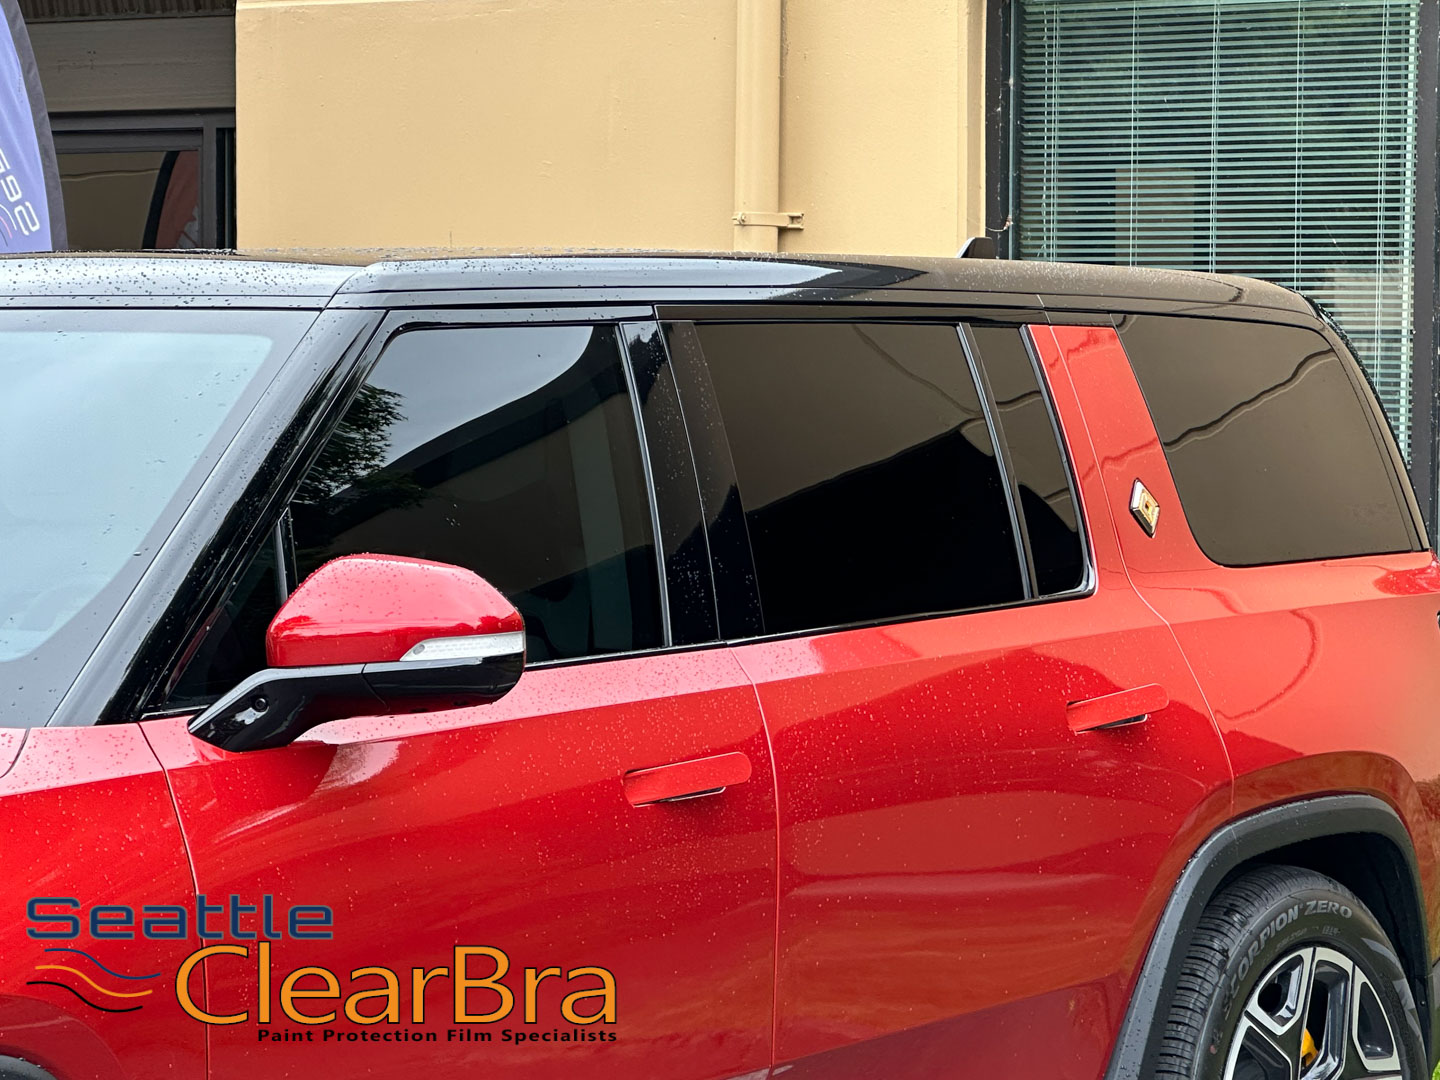 https://www.rivianforums.com/forum/attachments/rivian-r1s-canyon-red-xpel-ultimate-fusion-seattle-redmond-clear-bra-ppf-paint-protection-film-5-jpg.58091/